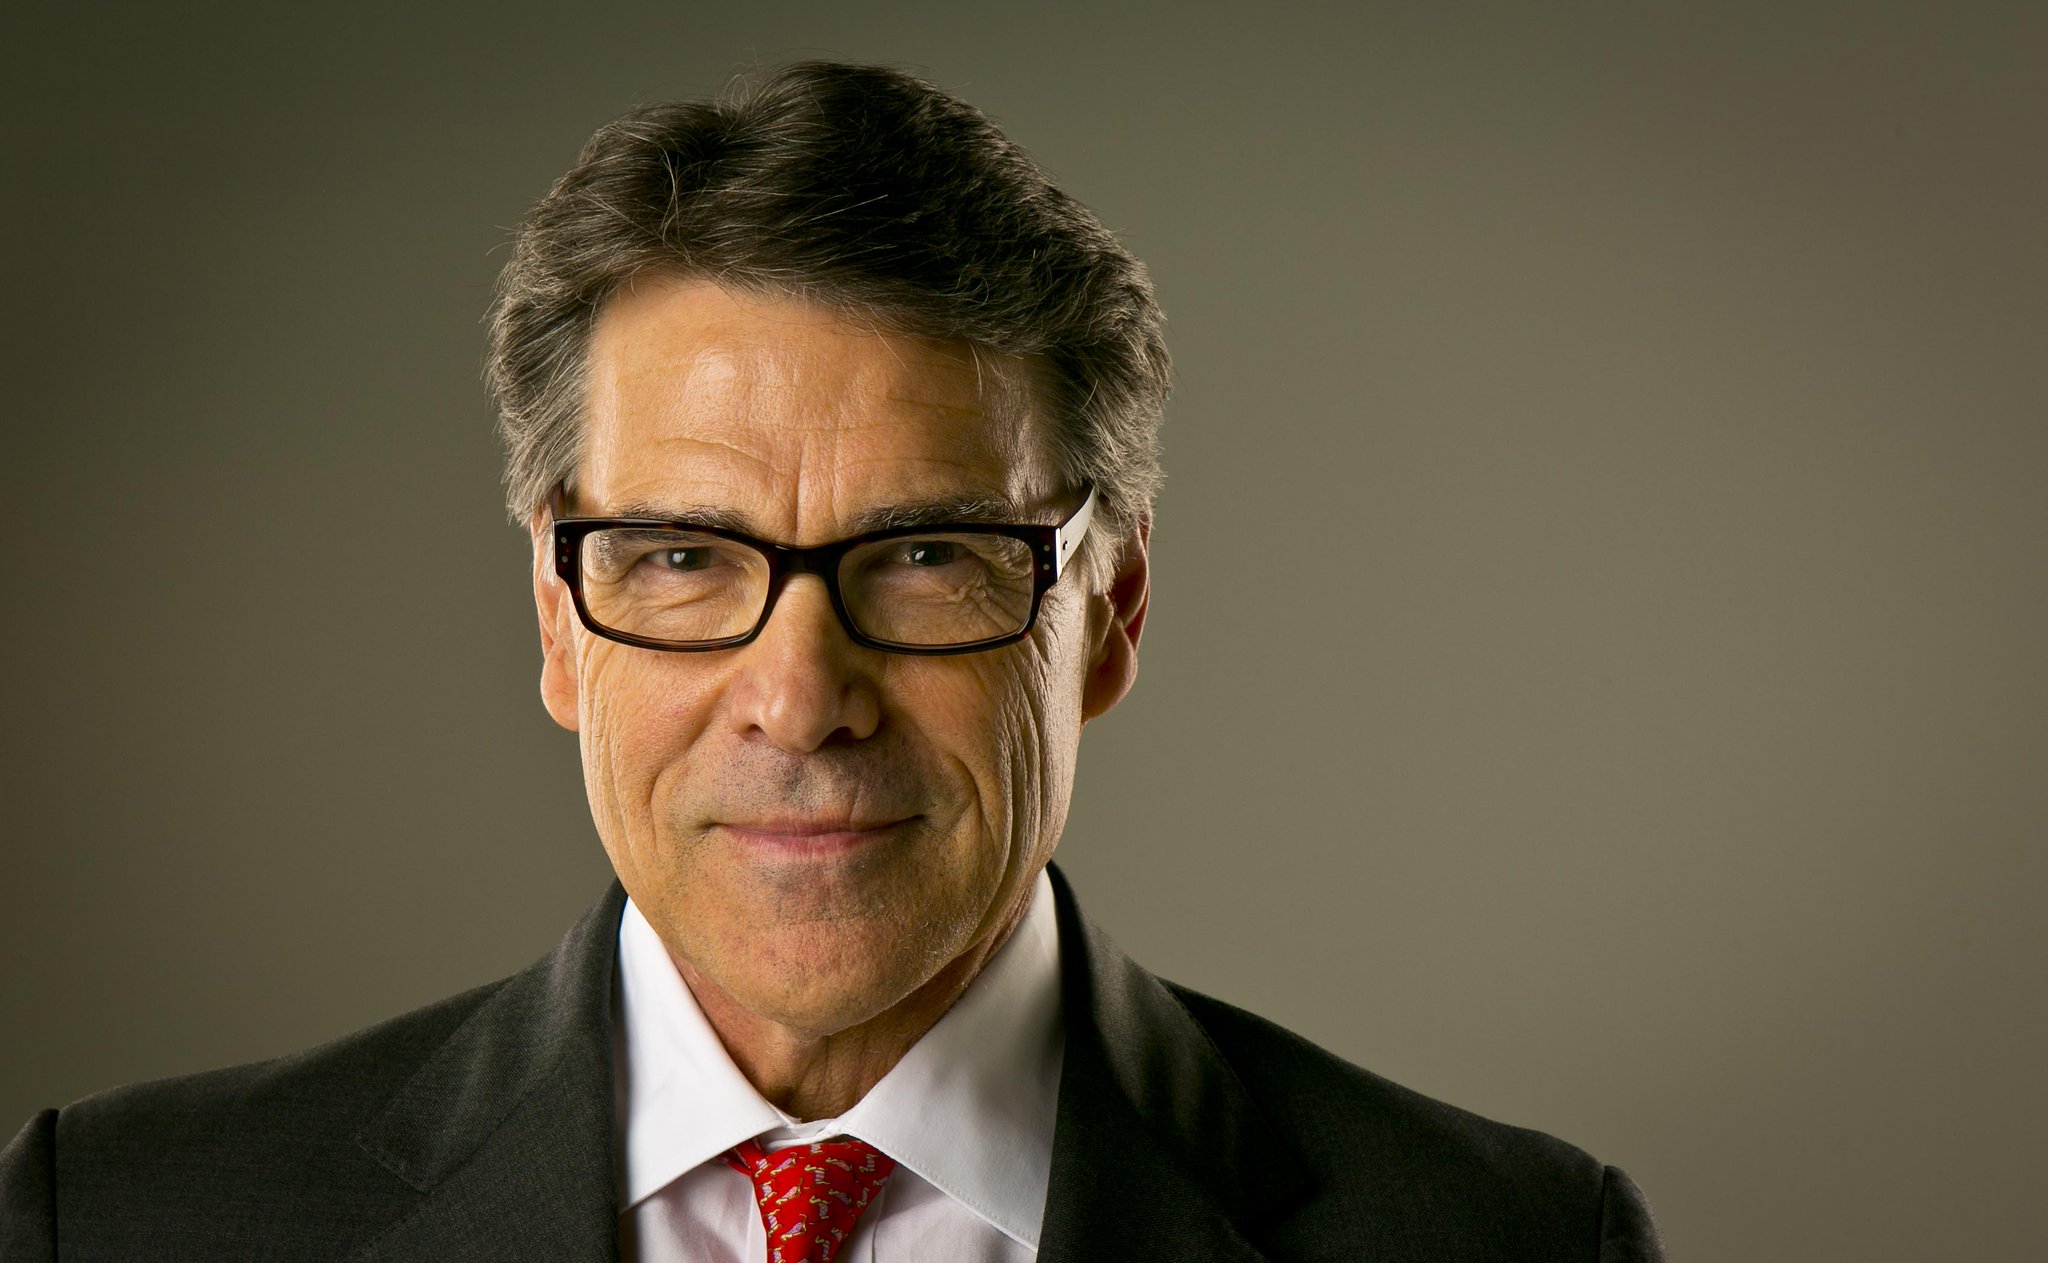 Happy birthday to our 9th Agriculture Commissioner, Rick Perry! 